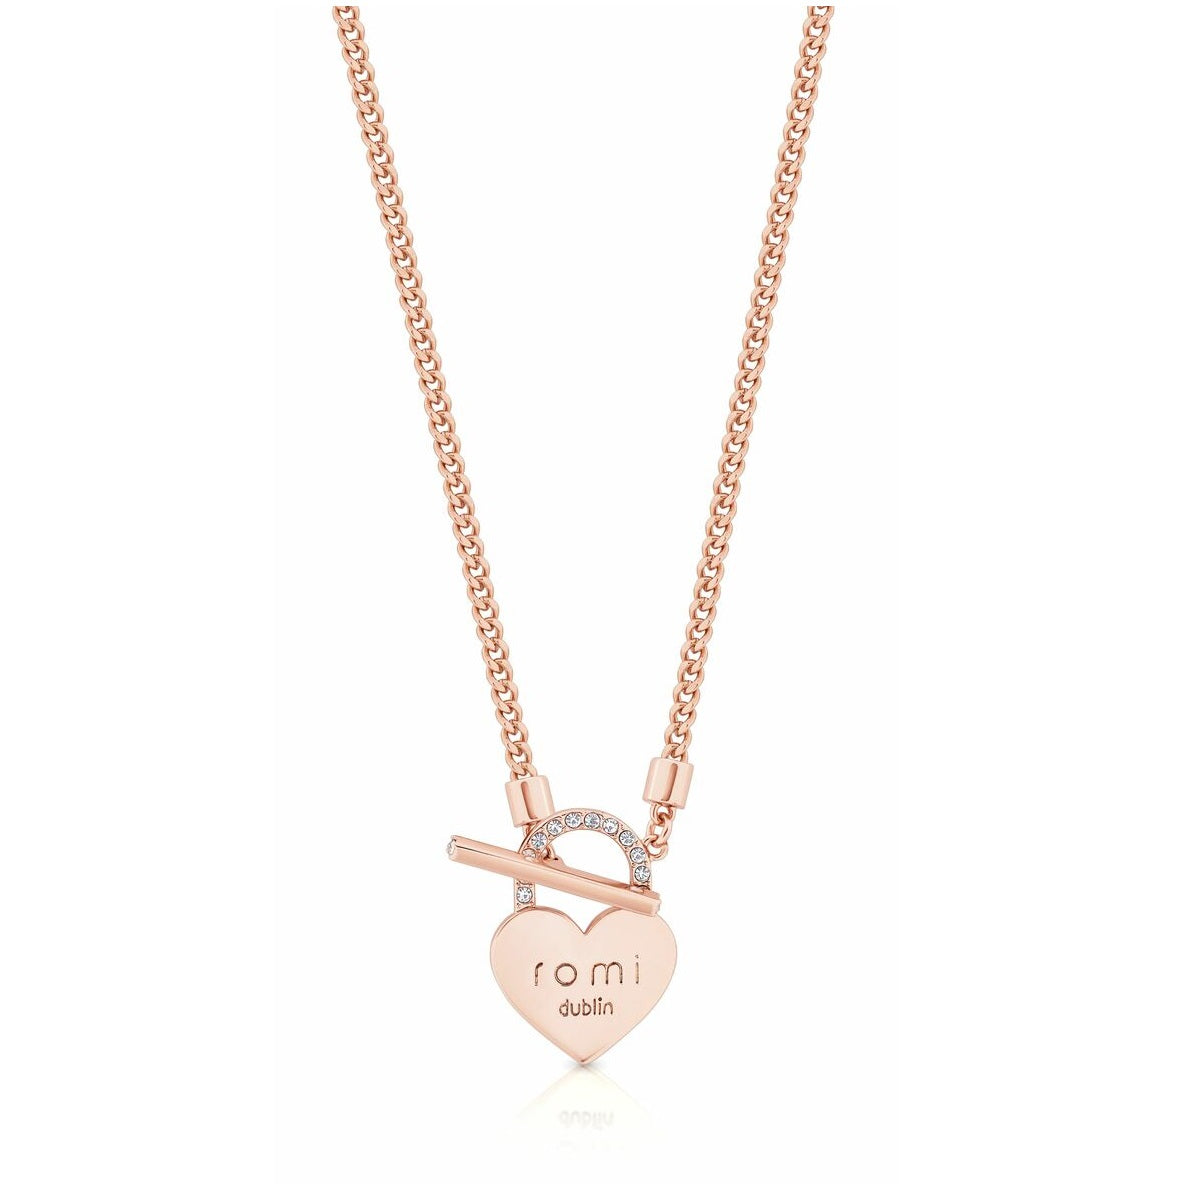 Romi Dublin Rose Gold Heart Necklace  Just Arrived NEW 2021